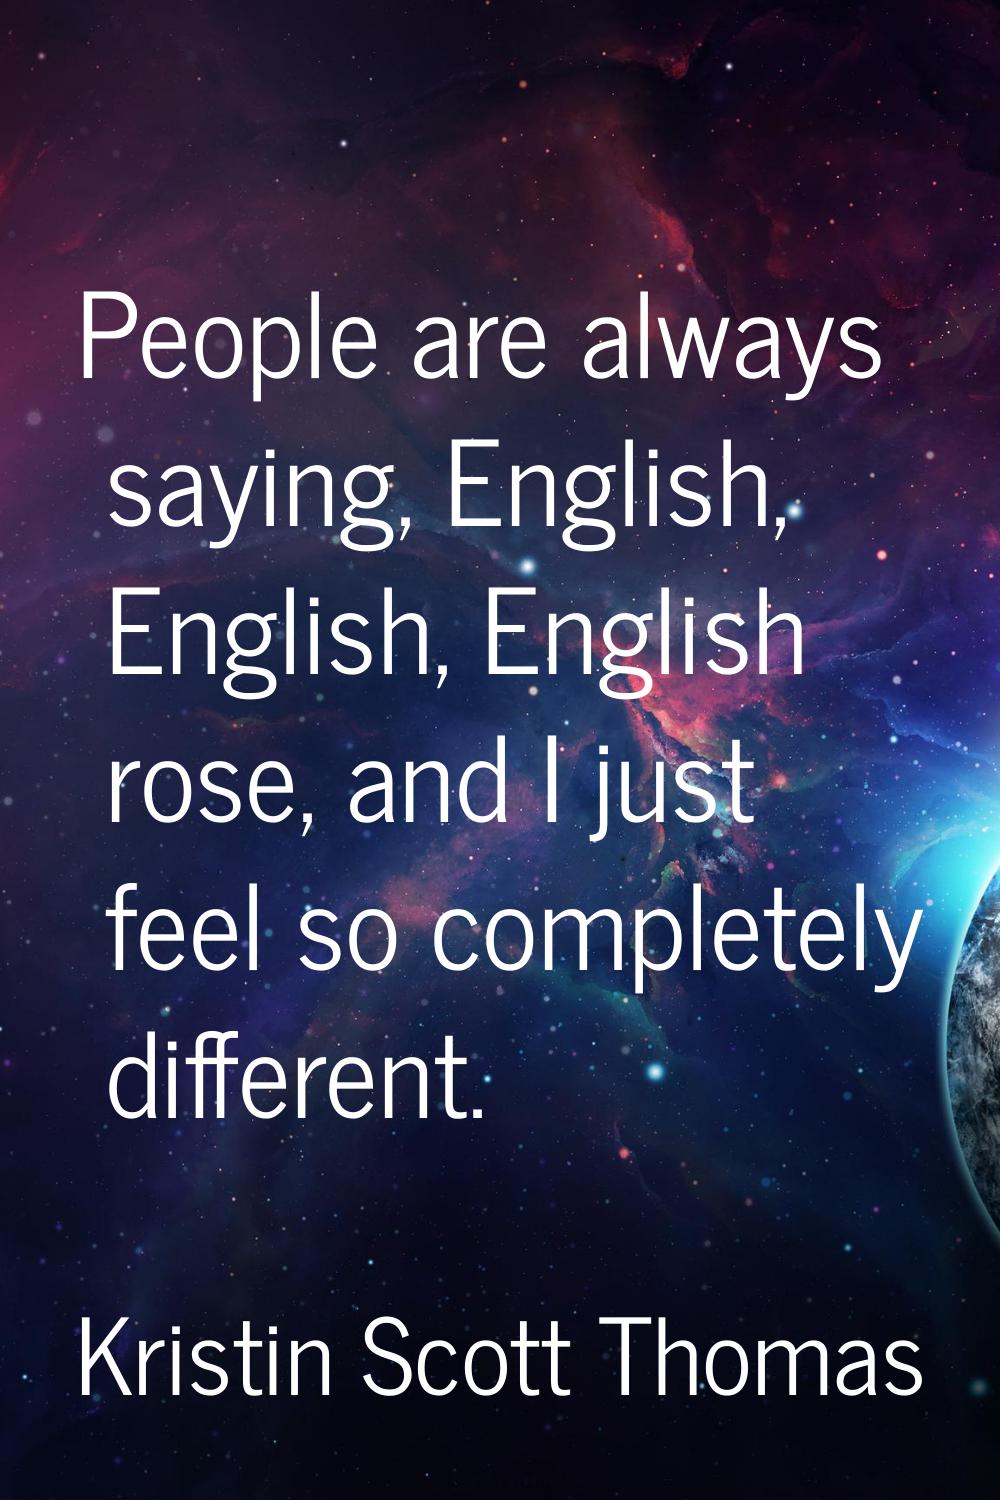 People are always saying, English, English, English rose, and I just feel so completely different.